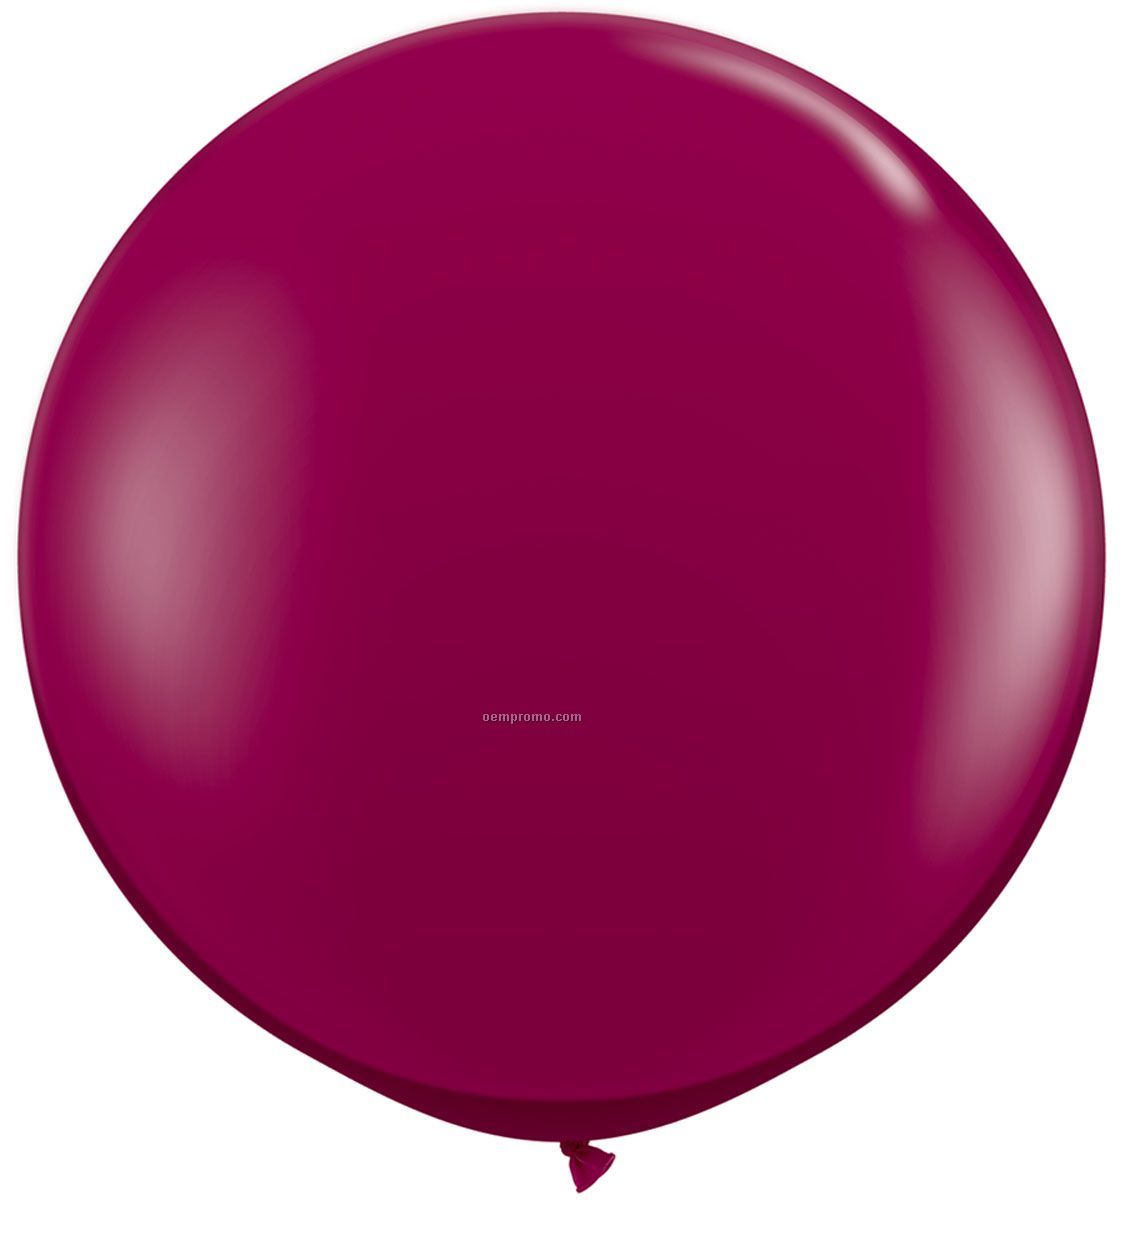 36" Giant Round Latex Balloon - Fashion Or Jewel Colors - Blank